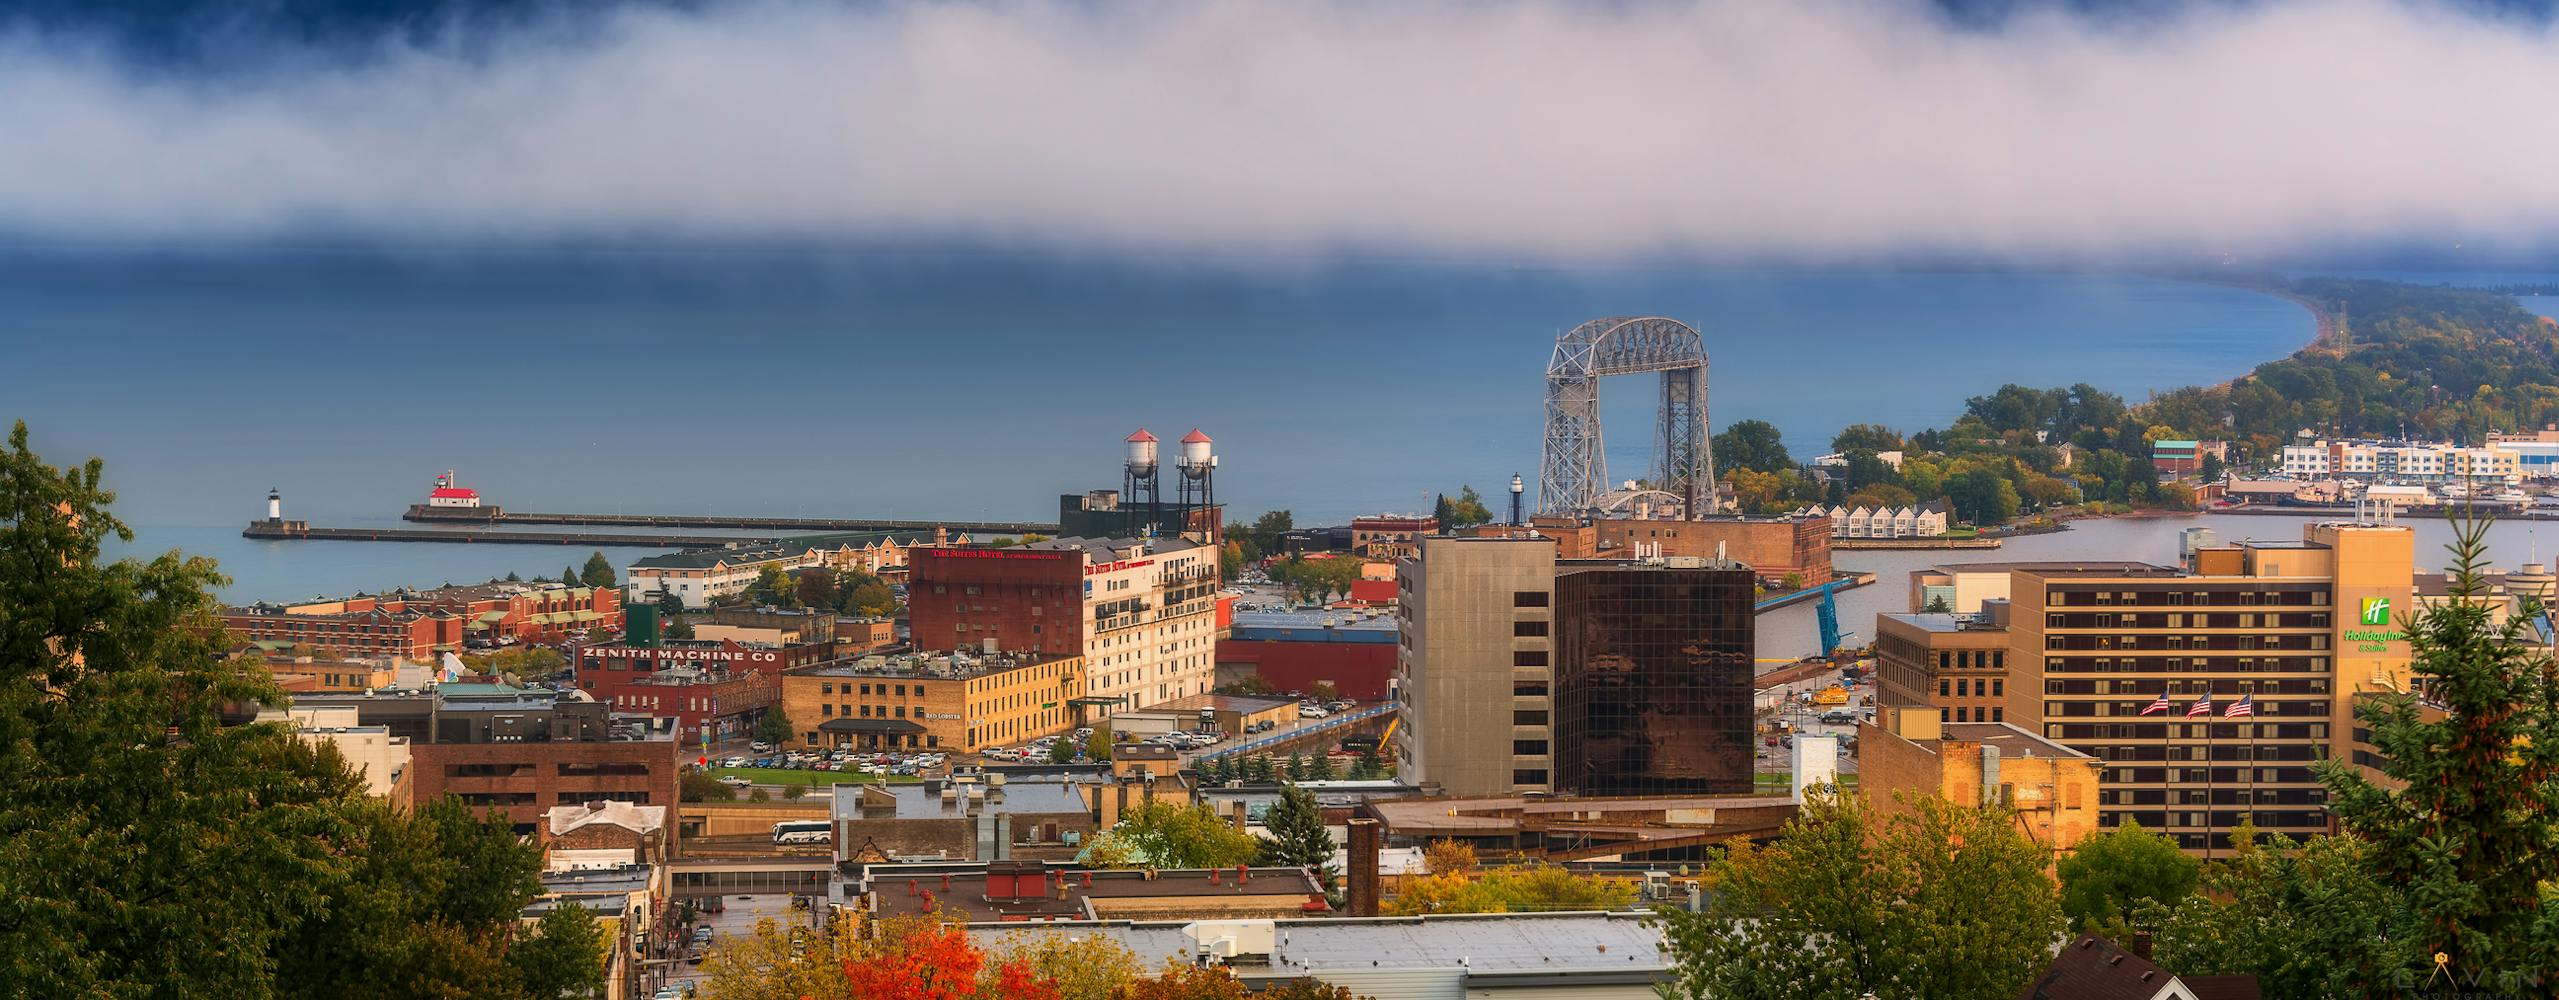 City of Duluth, MN